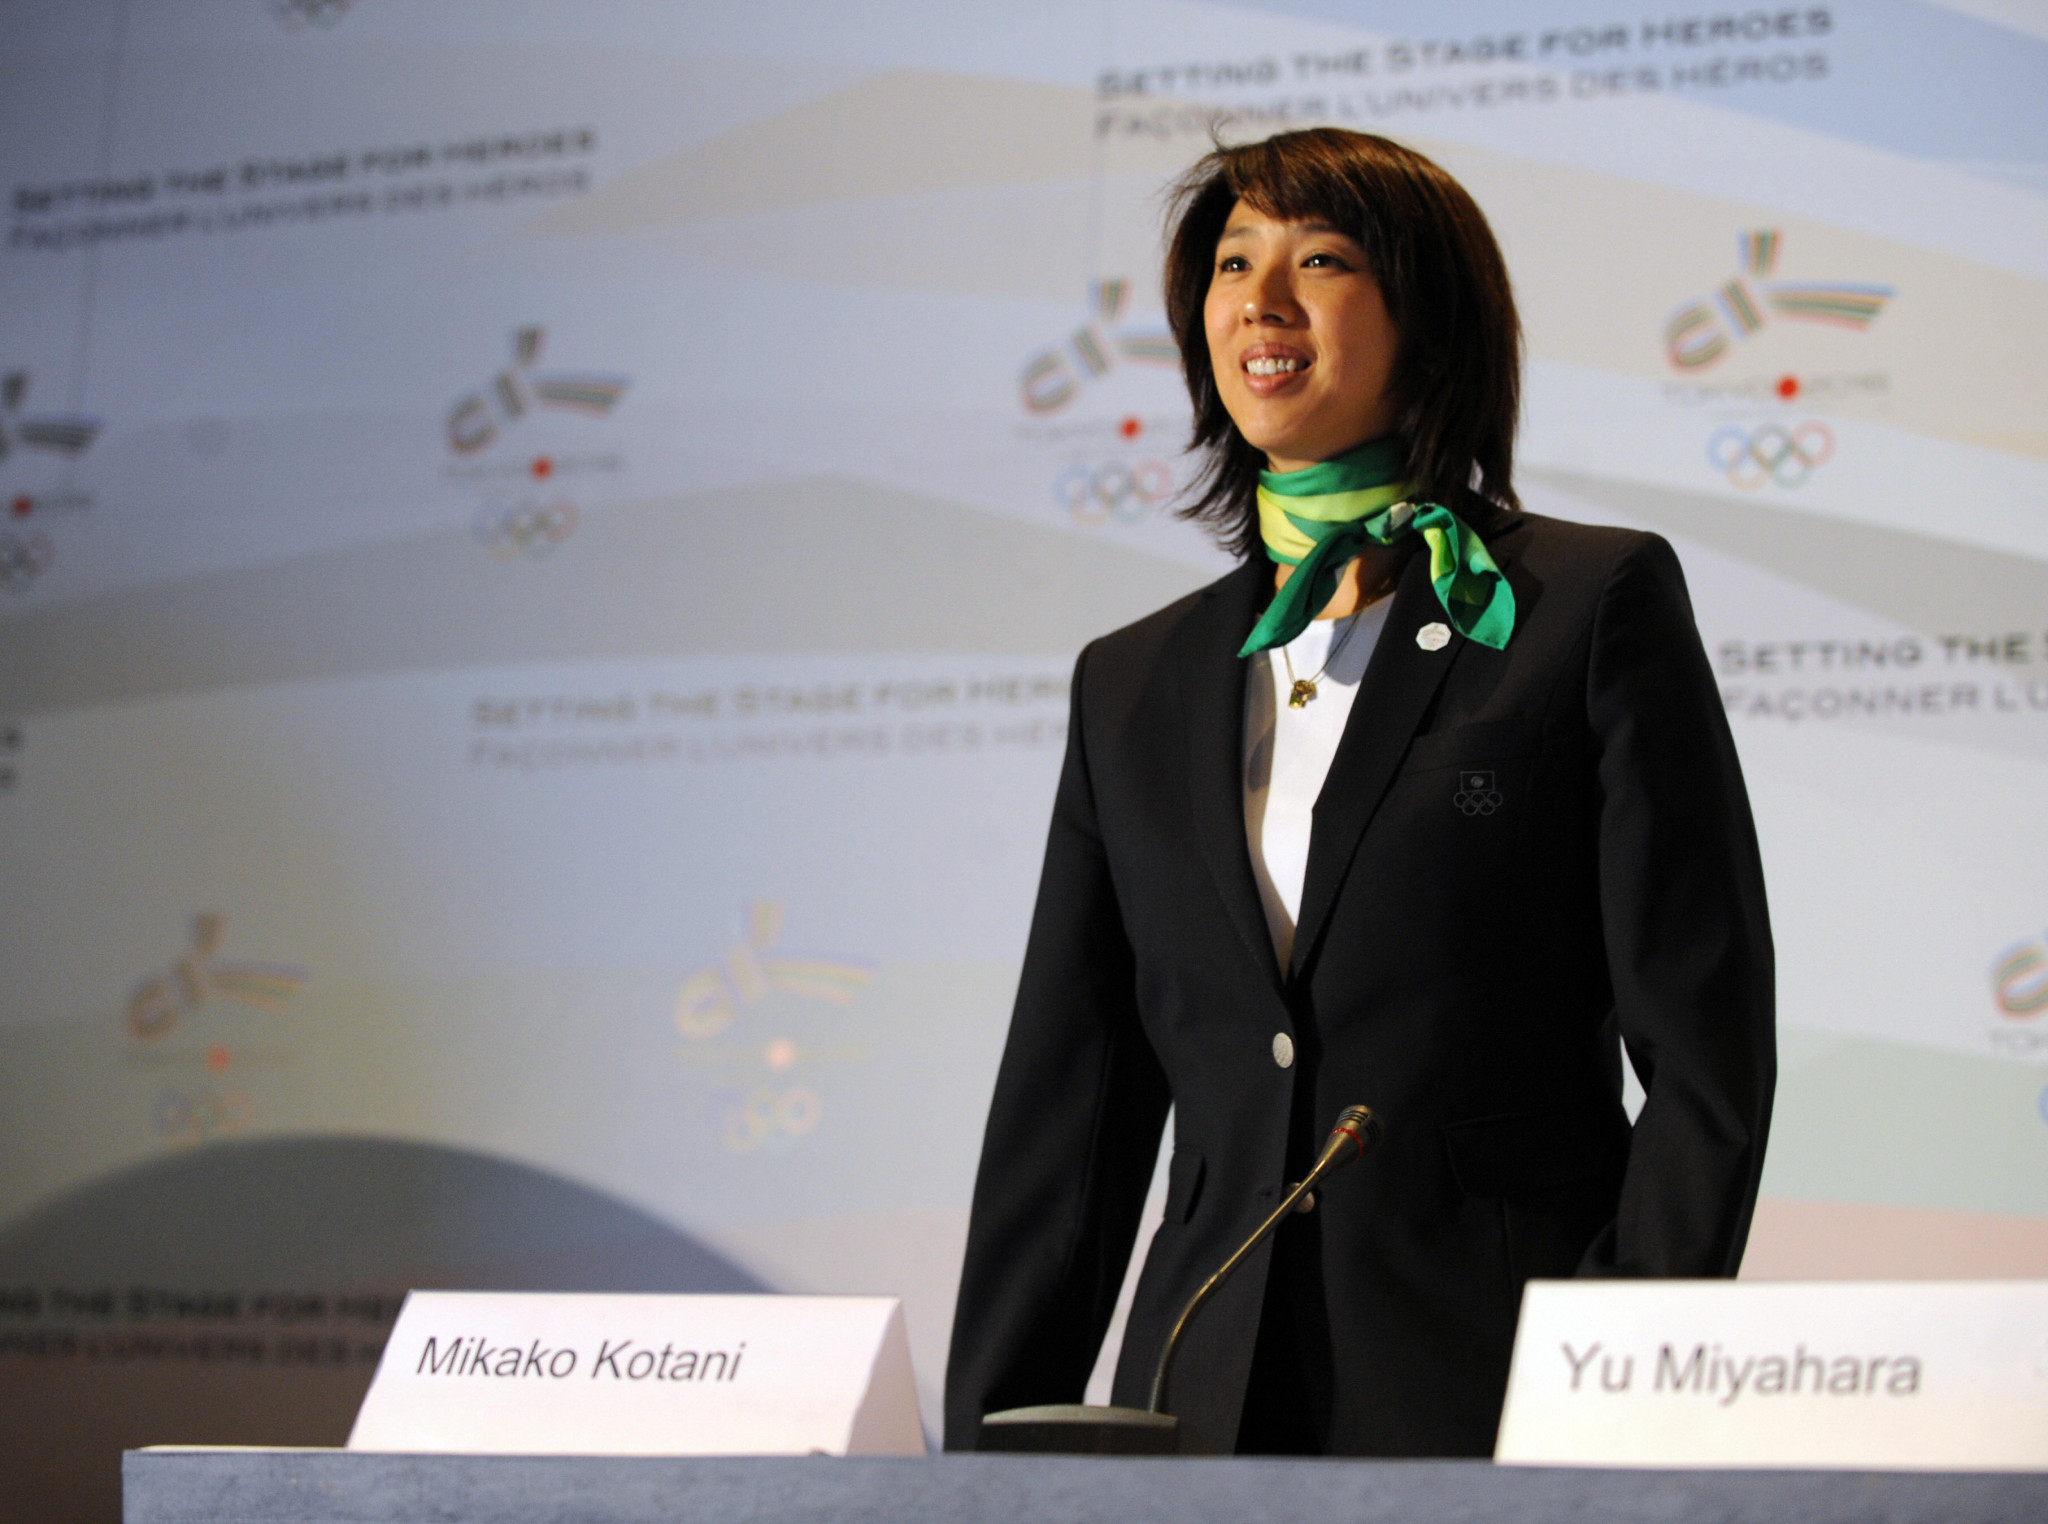 Mikako Kotani is the new sports director for Tokyo 2020 ©Getty Images